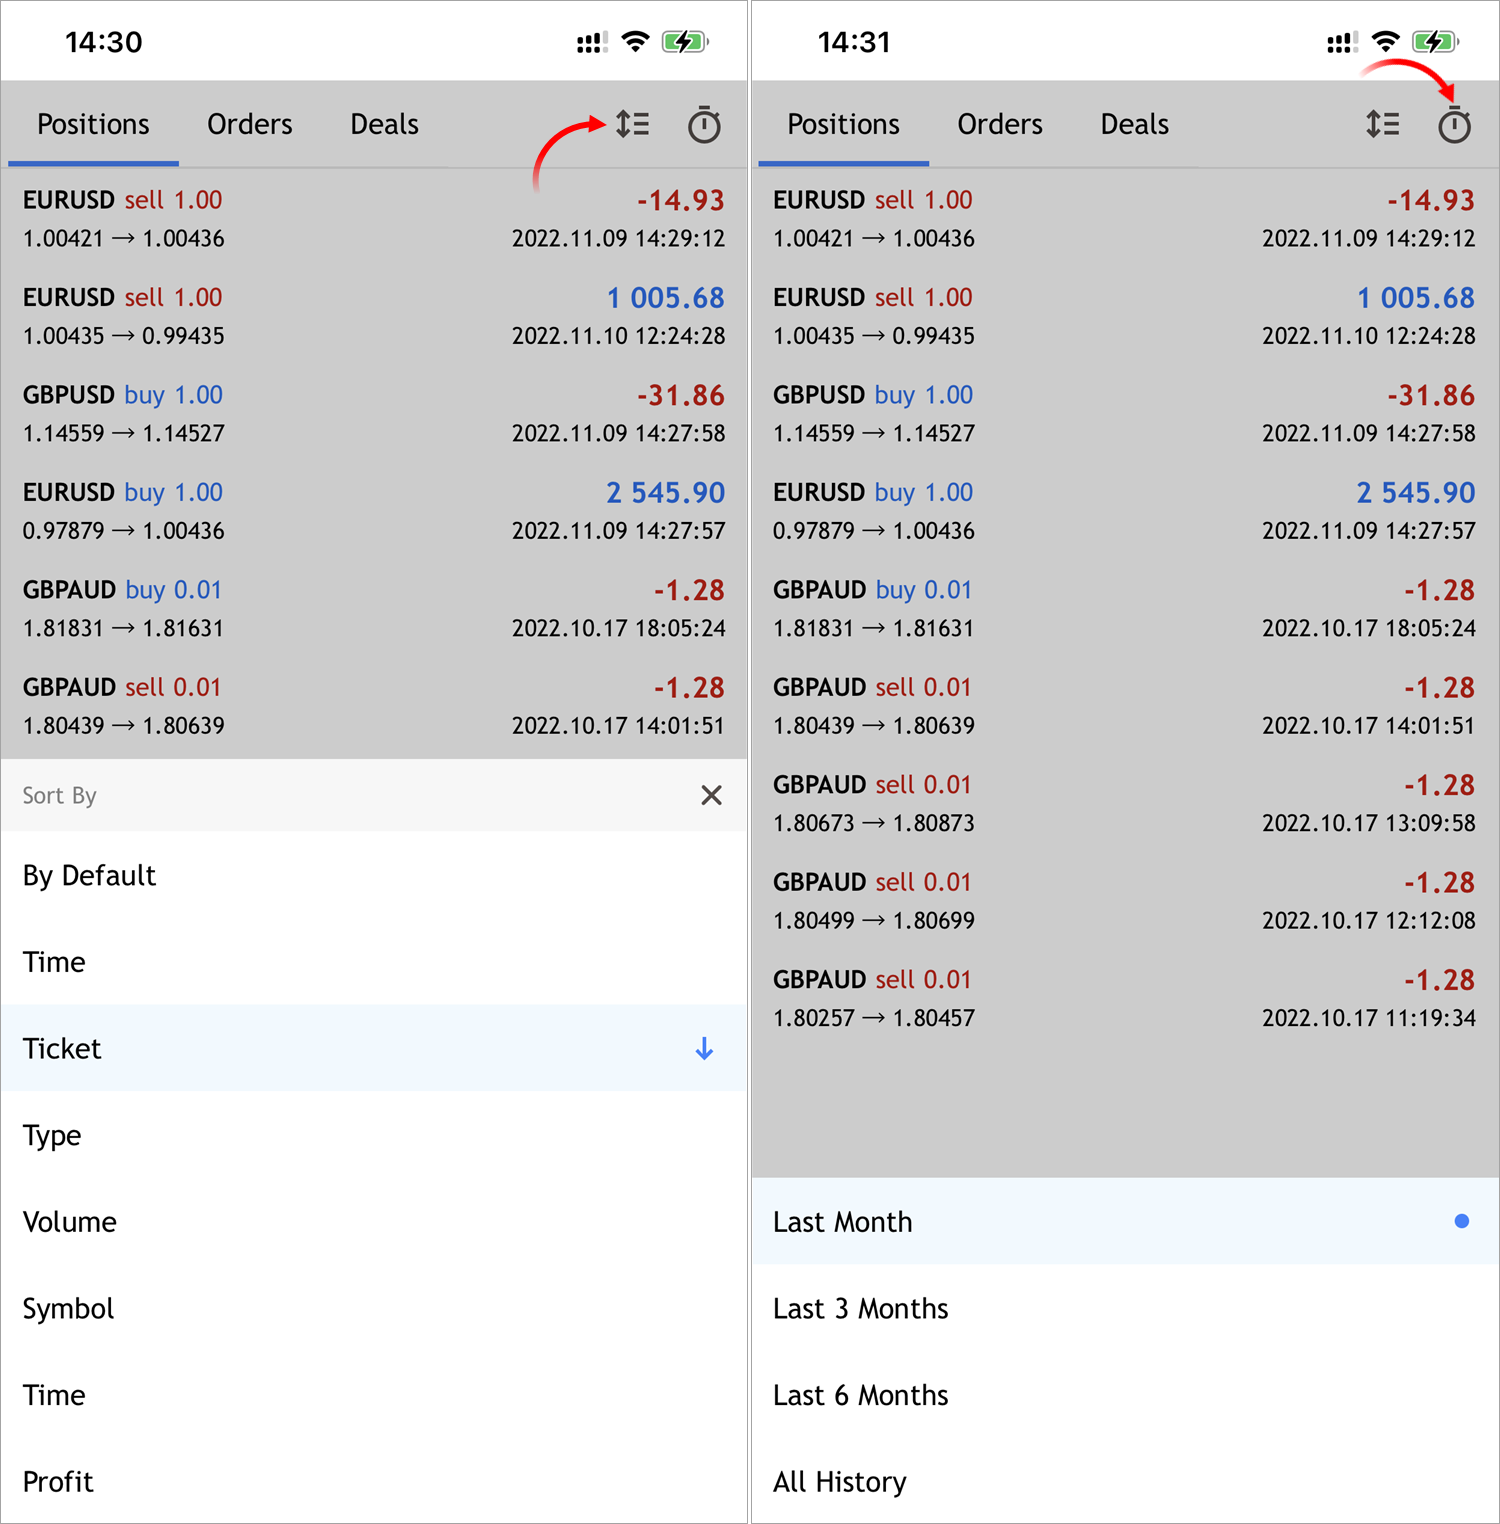 Customizable trading history view in the mobile version